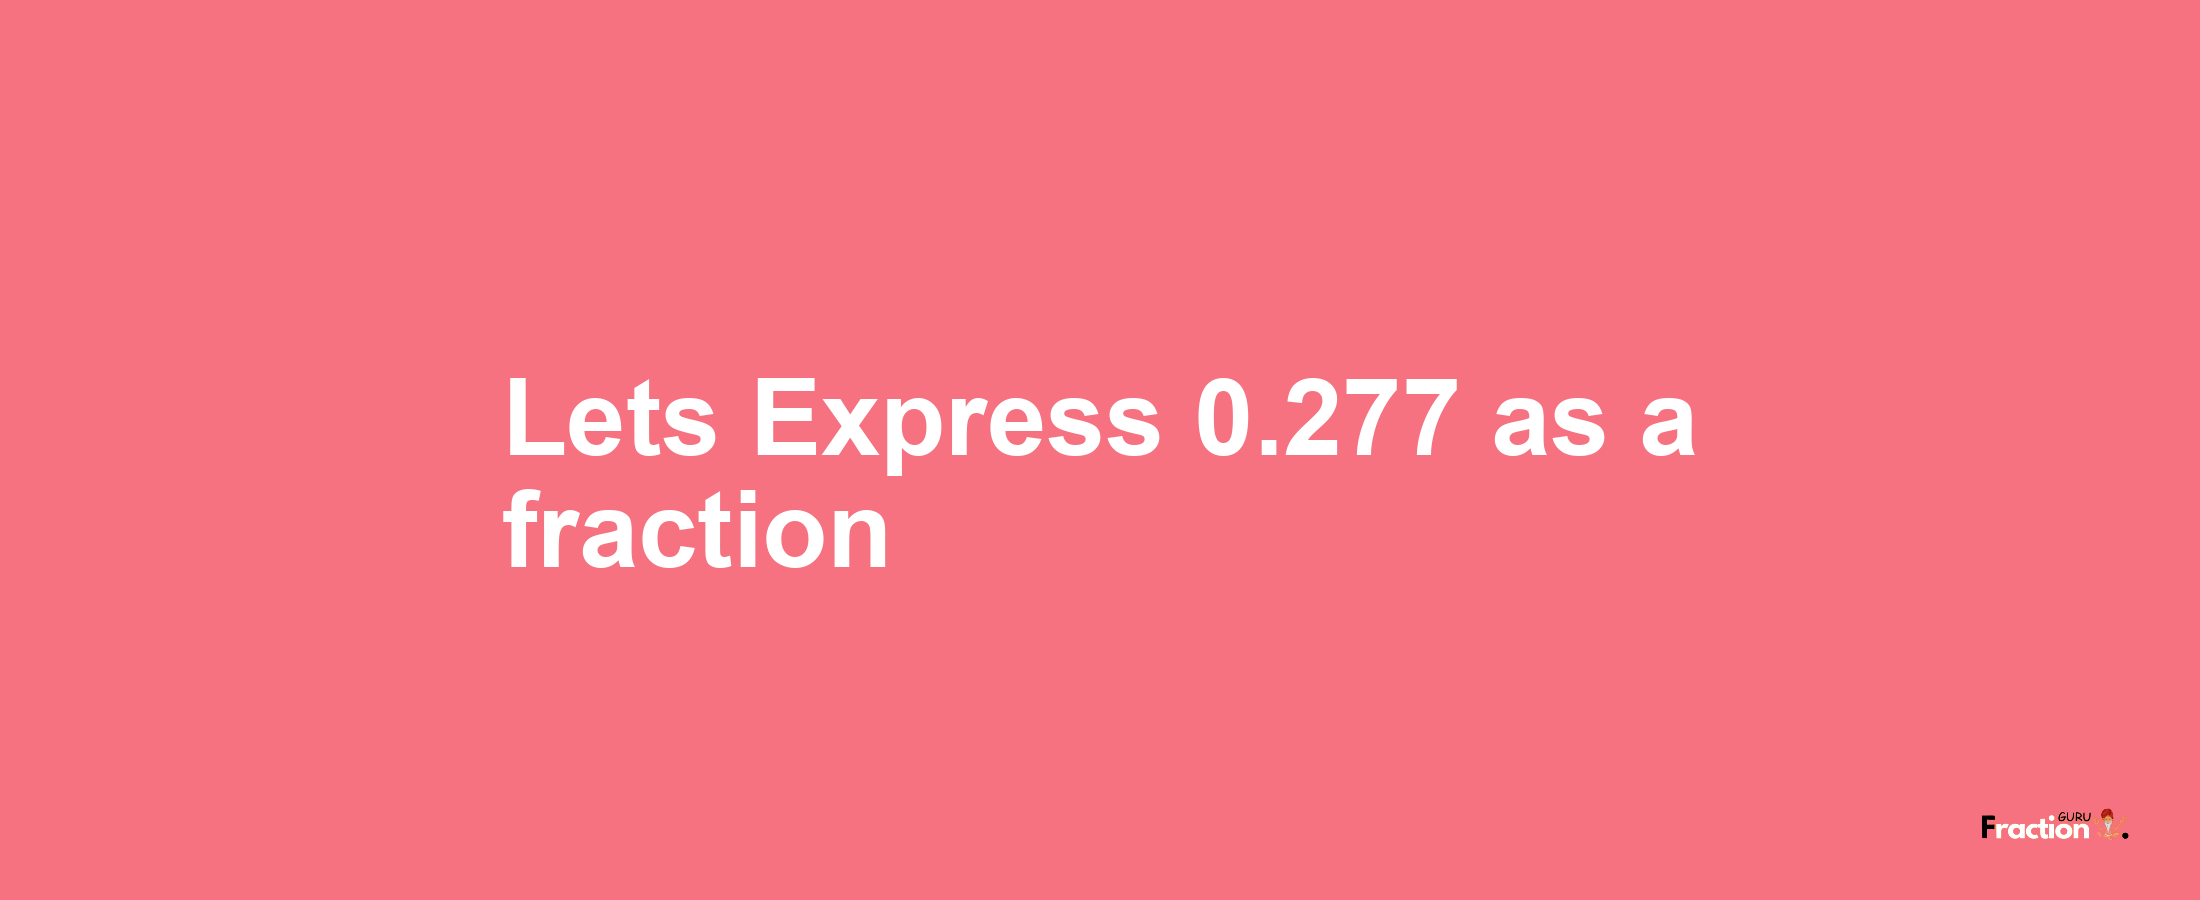 Lets Express 0.277 as afraction